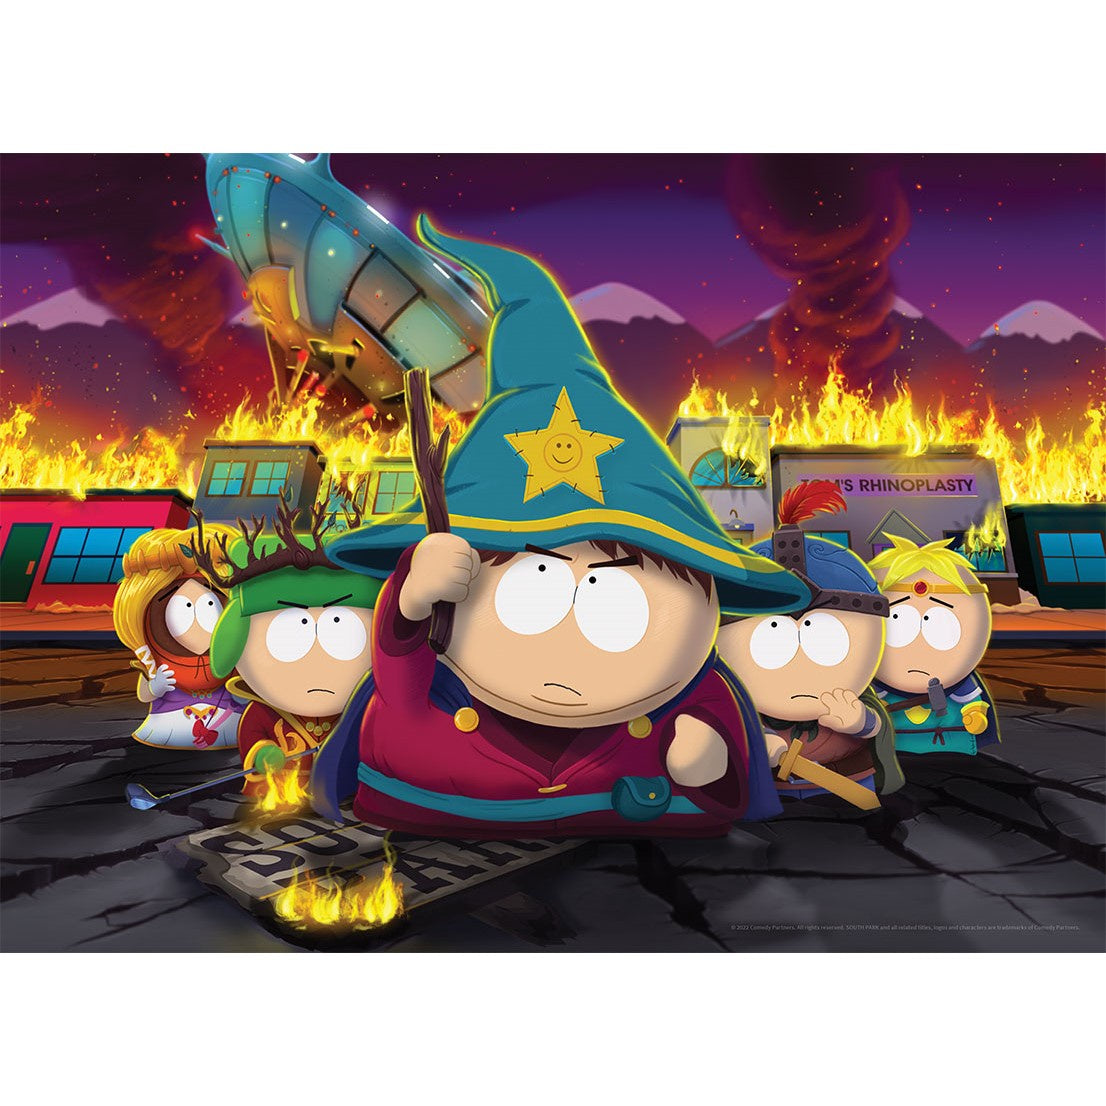 South Park The Stick of Truth 1000 Piece Jigsaw